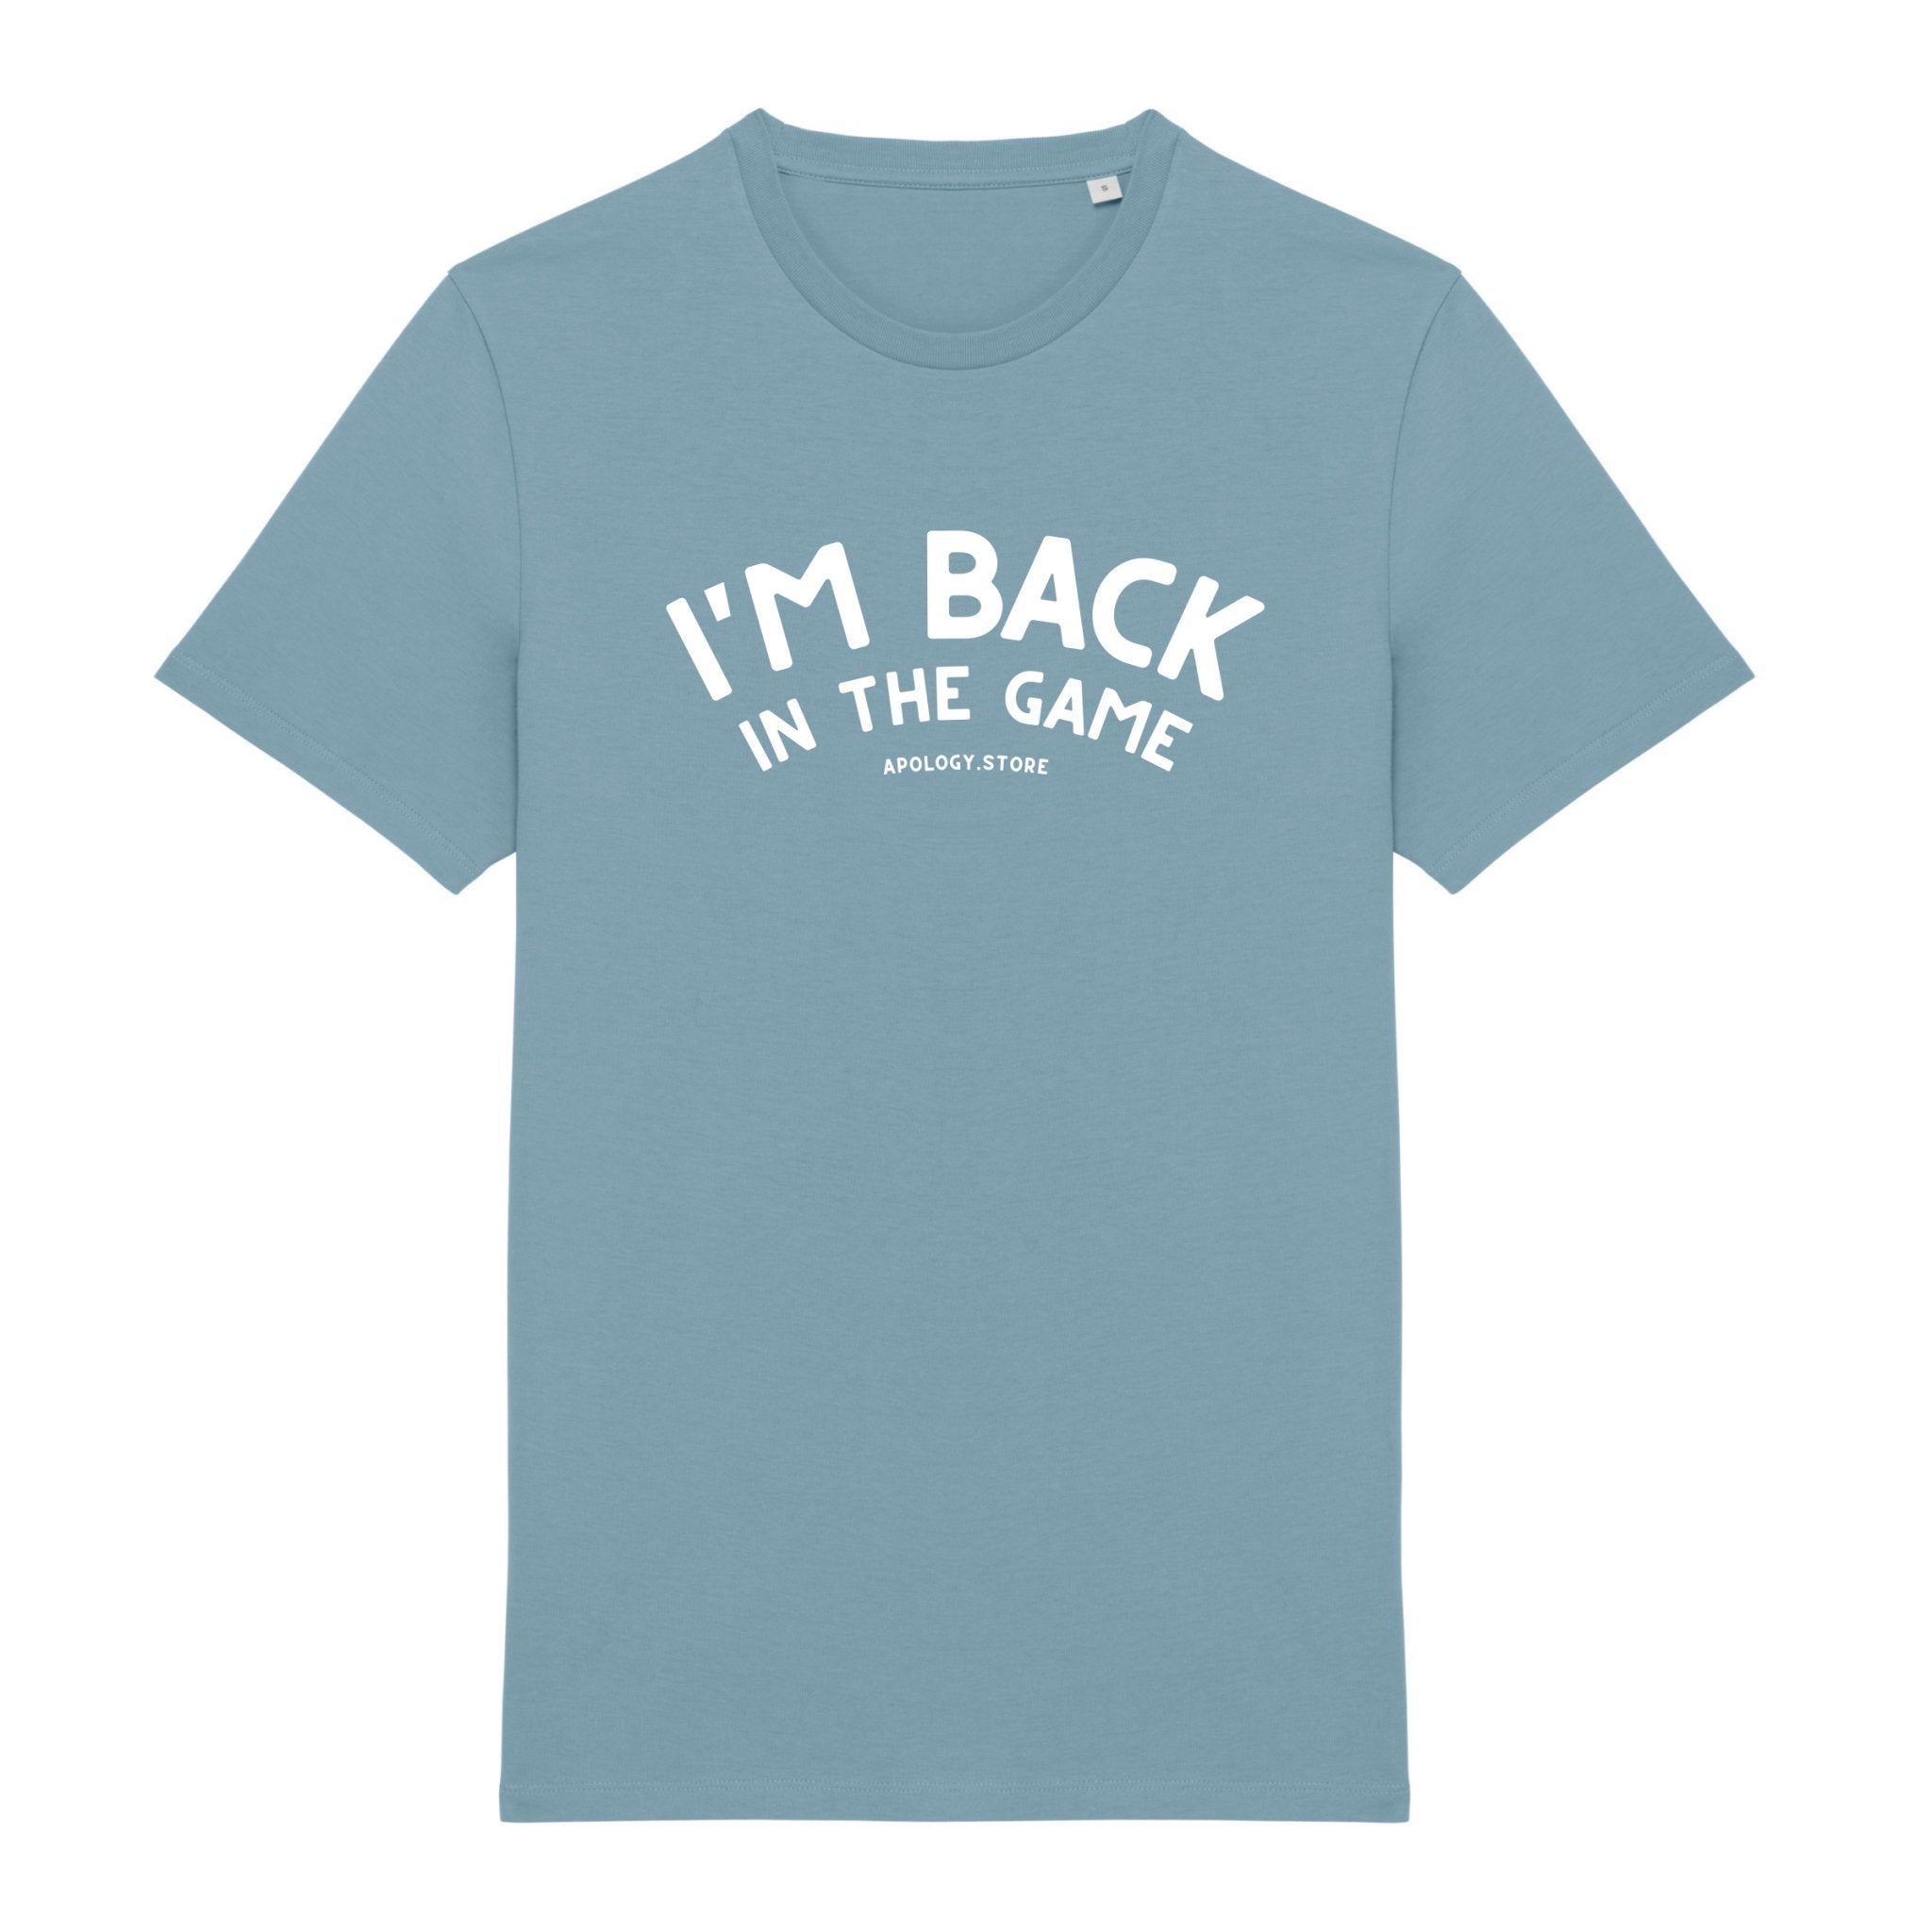 https://apology.store/cdn/shop/products/t-shirt-im-back-in-the-game-fabrique-au-portugal-867773.jpg?v=1697476478&width=3840